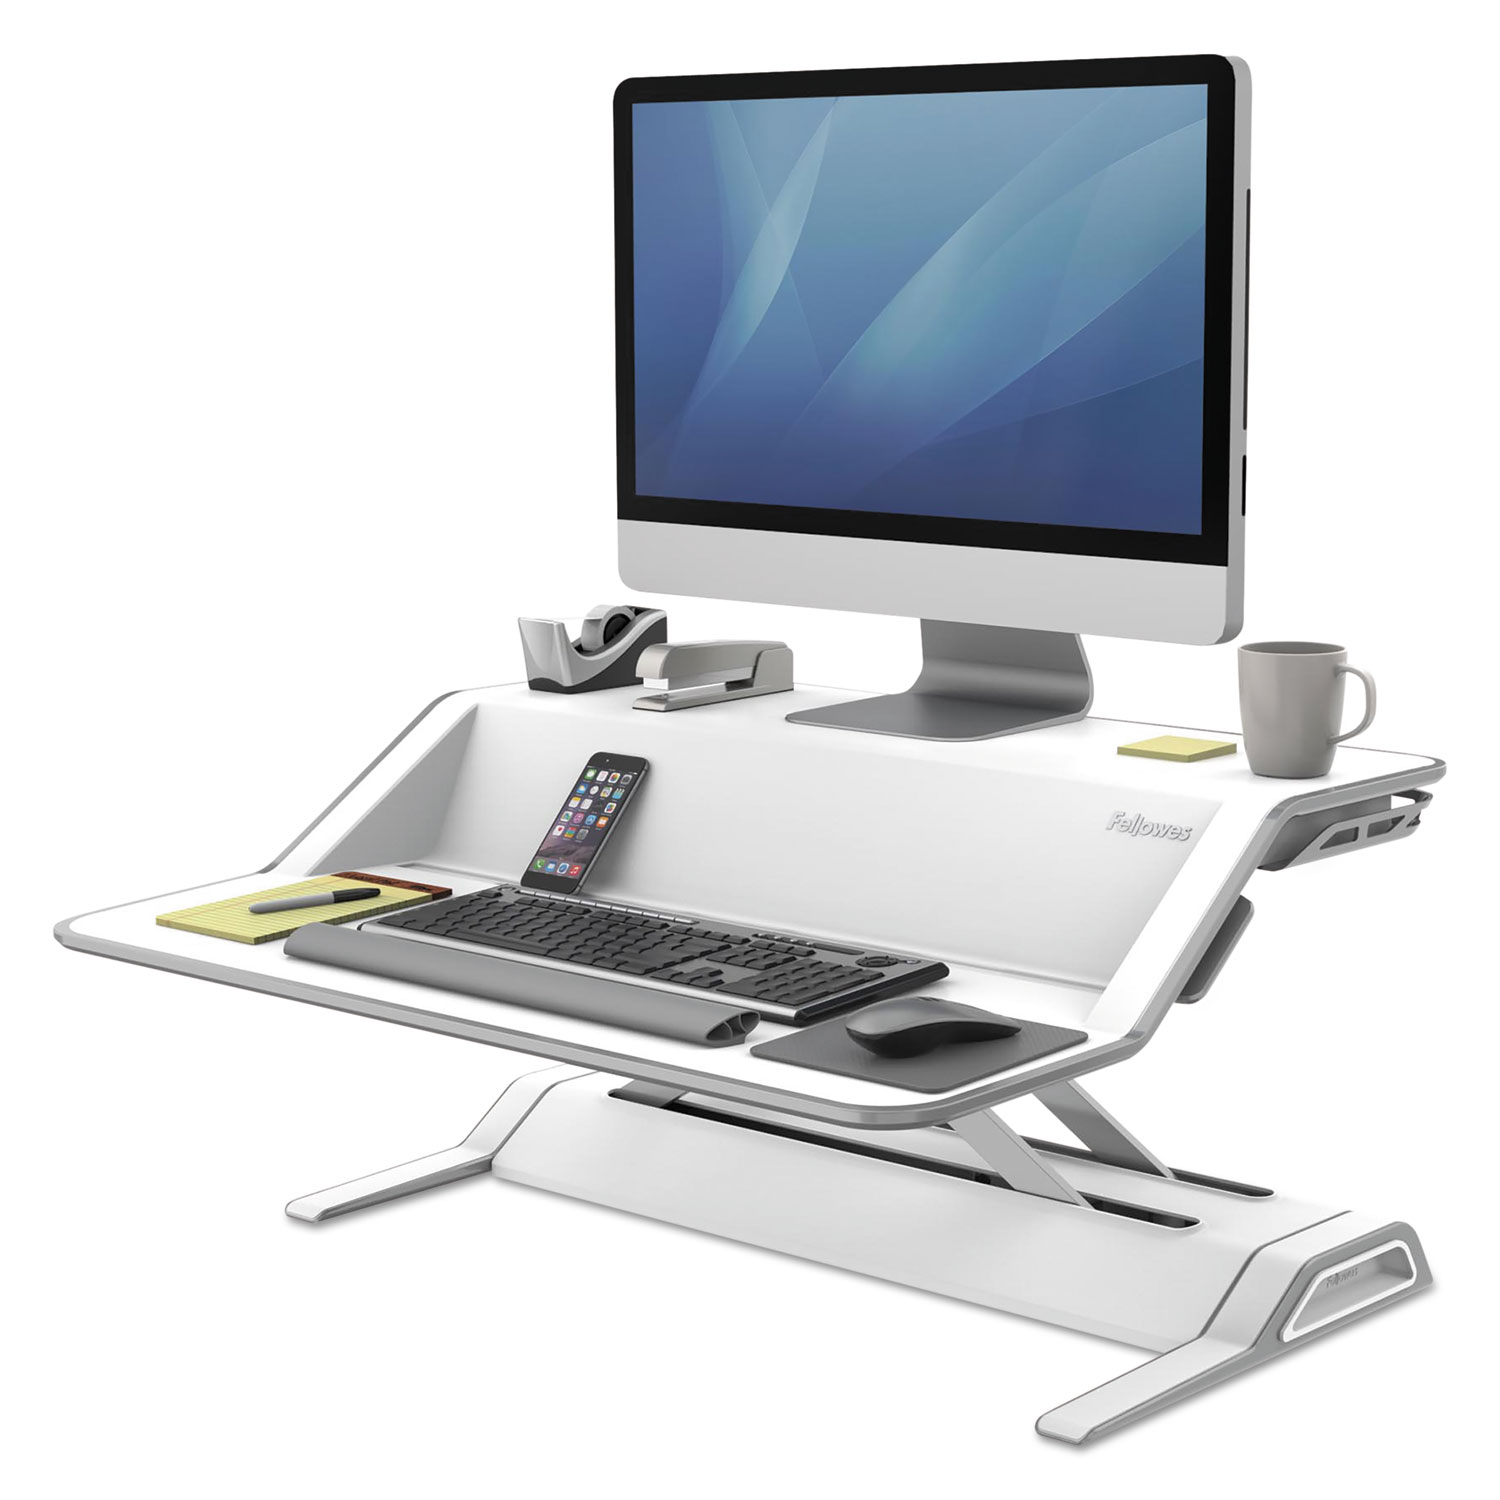  Fellowes 0009901 Lotus Sit-Stand Workstation, 32.75w x 24.25d x 5.5 to 22.5h, White (FEL0009901) 